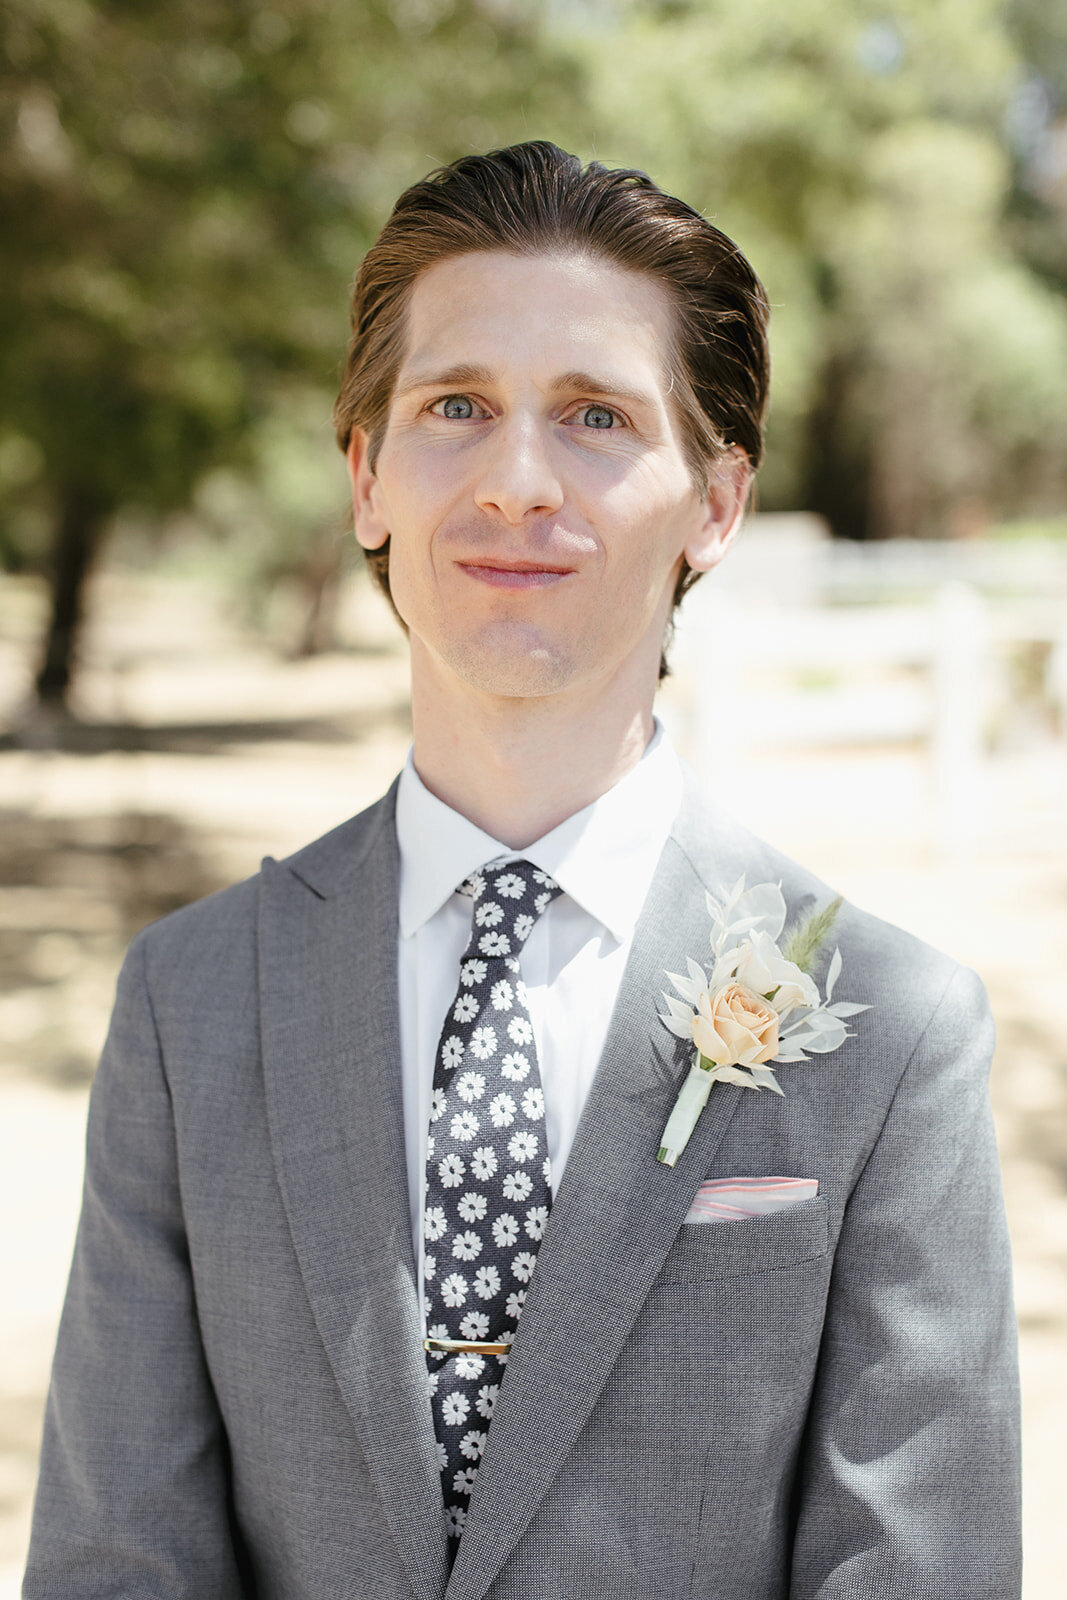 Groom poses for portrait in a grey suit, floral tie, and dried boutonniere.